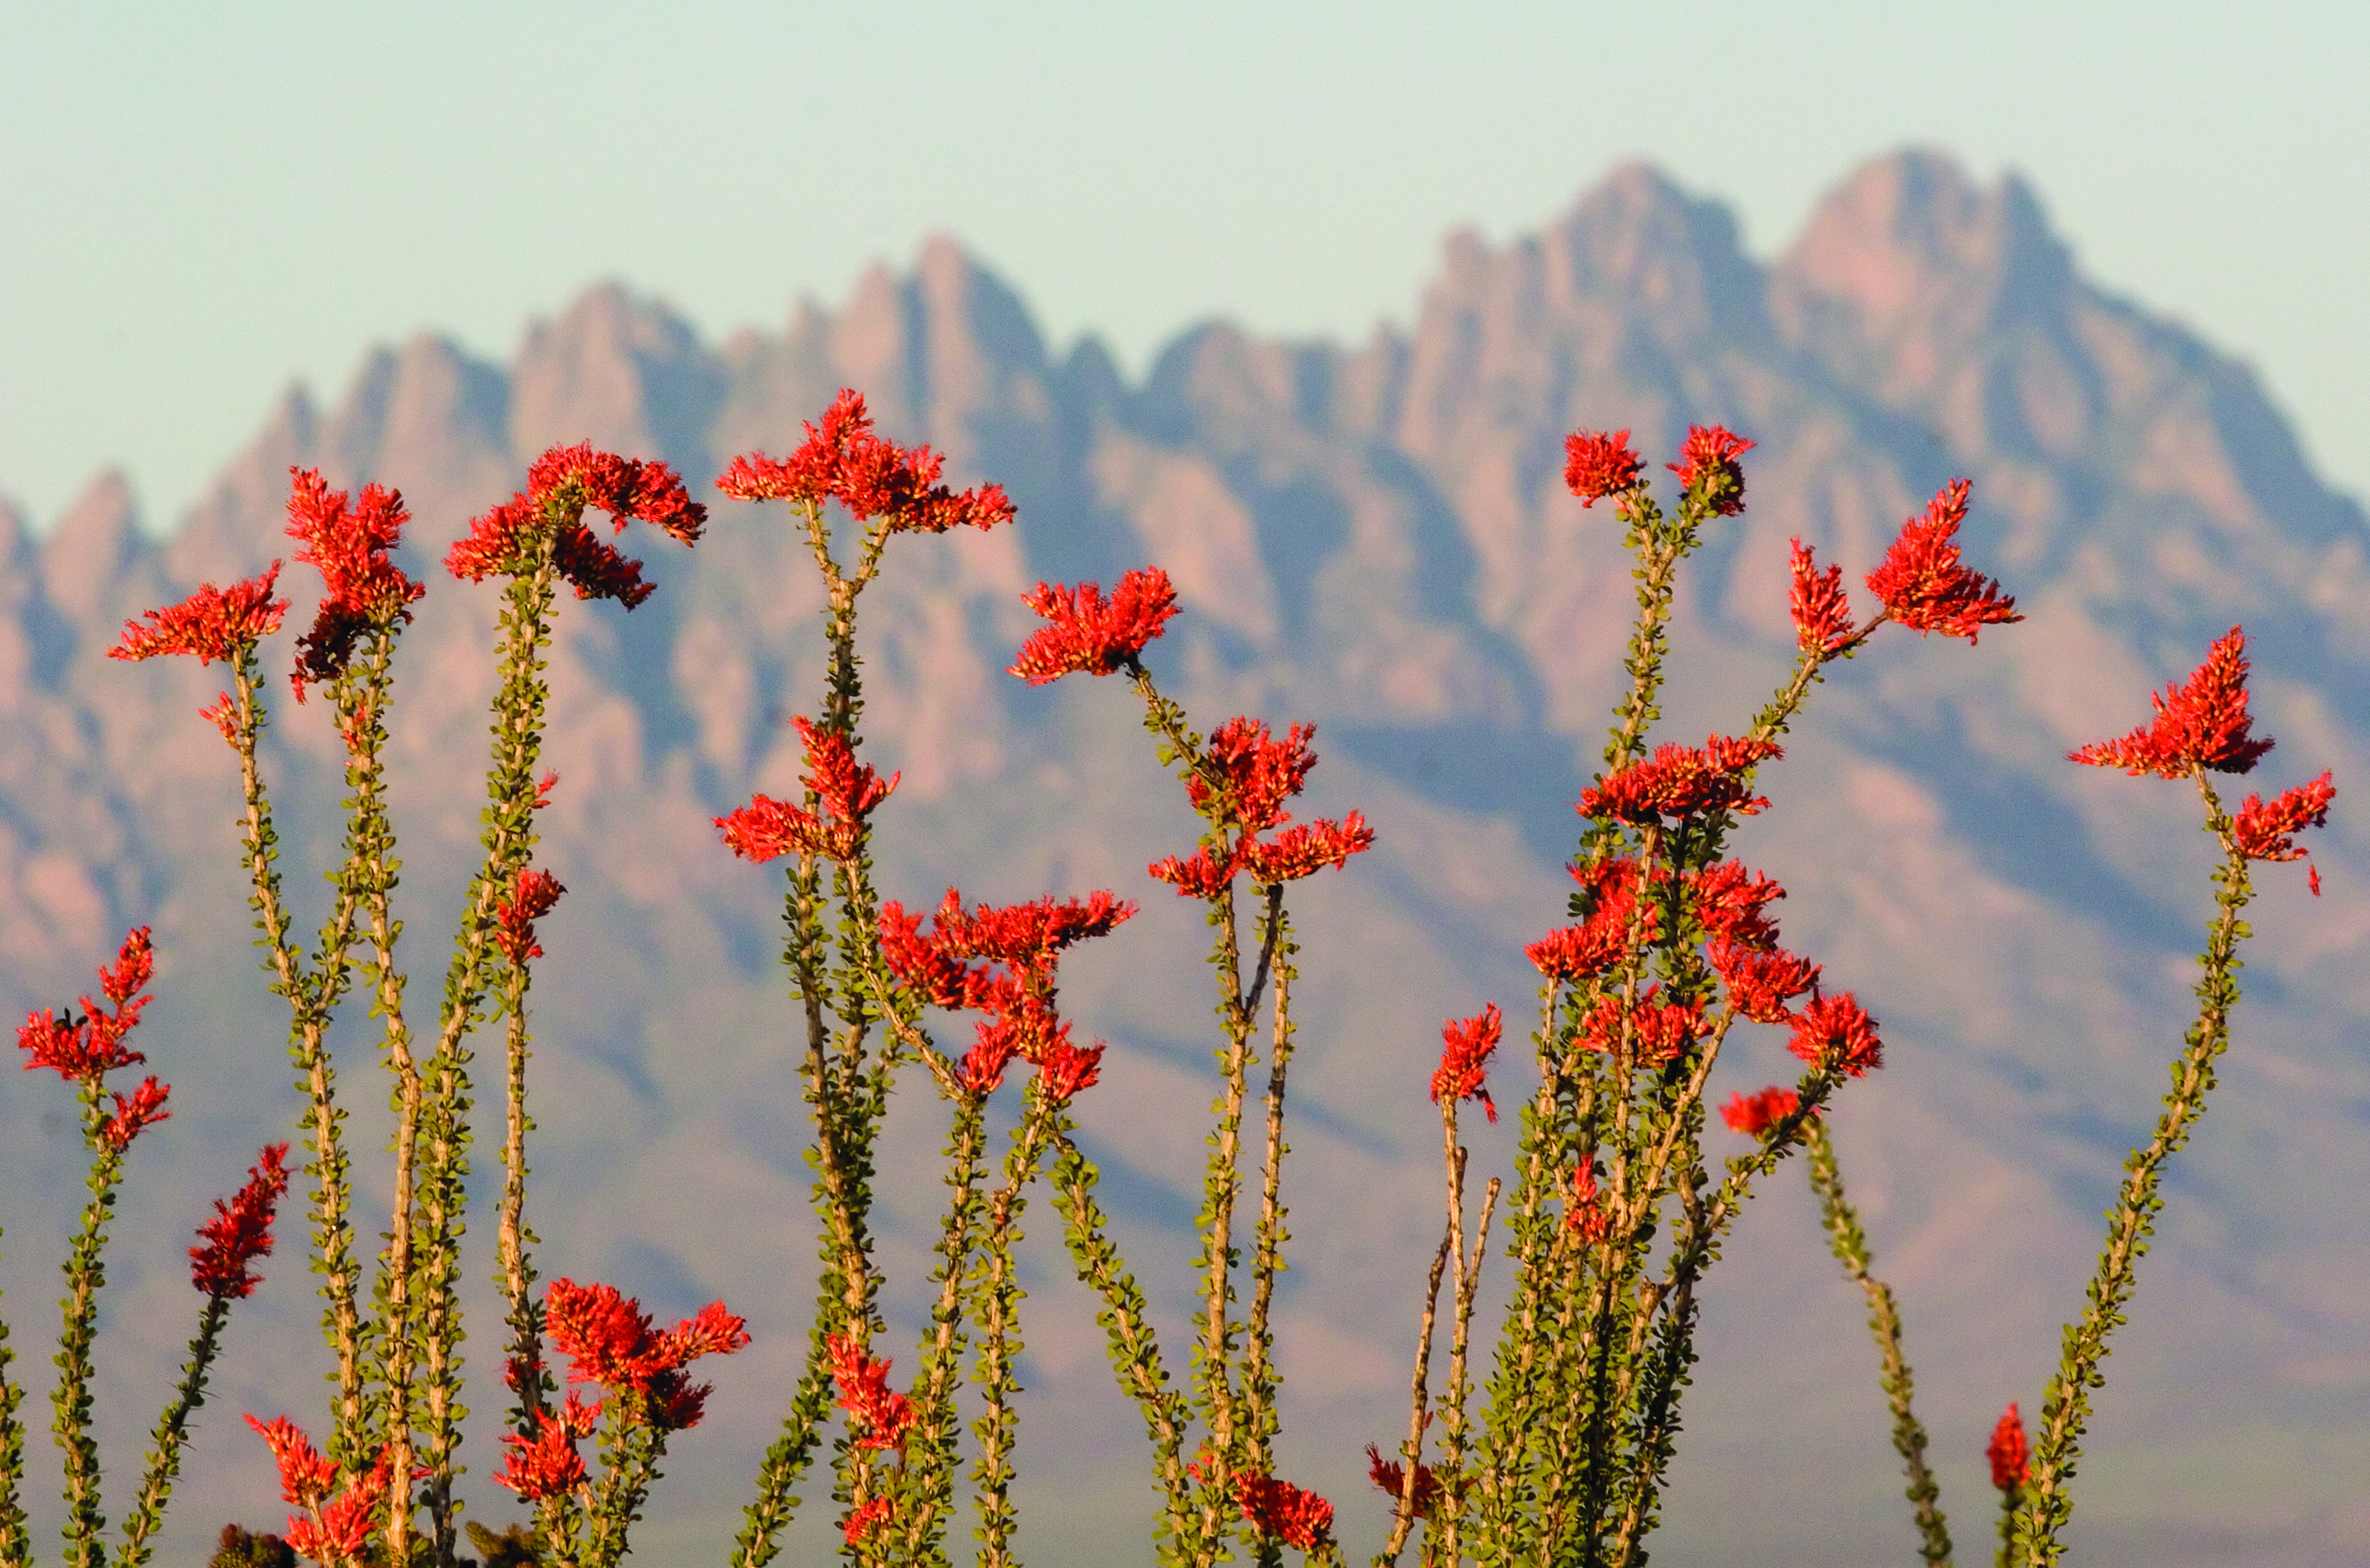 Organ Mountains Flowers - image courtesy of Las Cruces CVB 